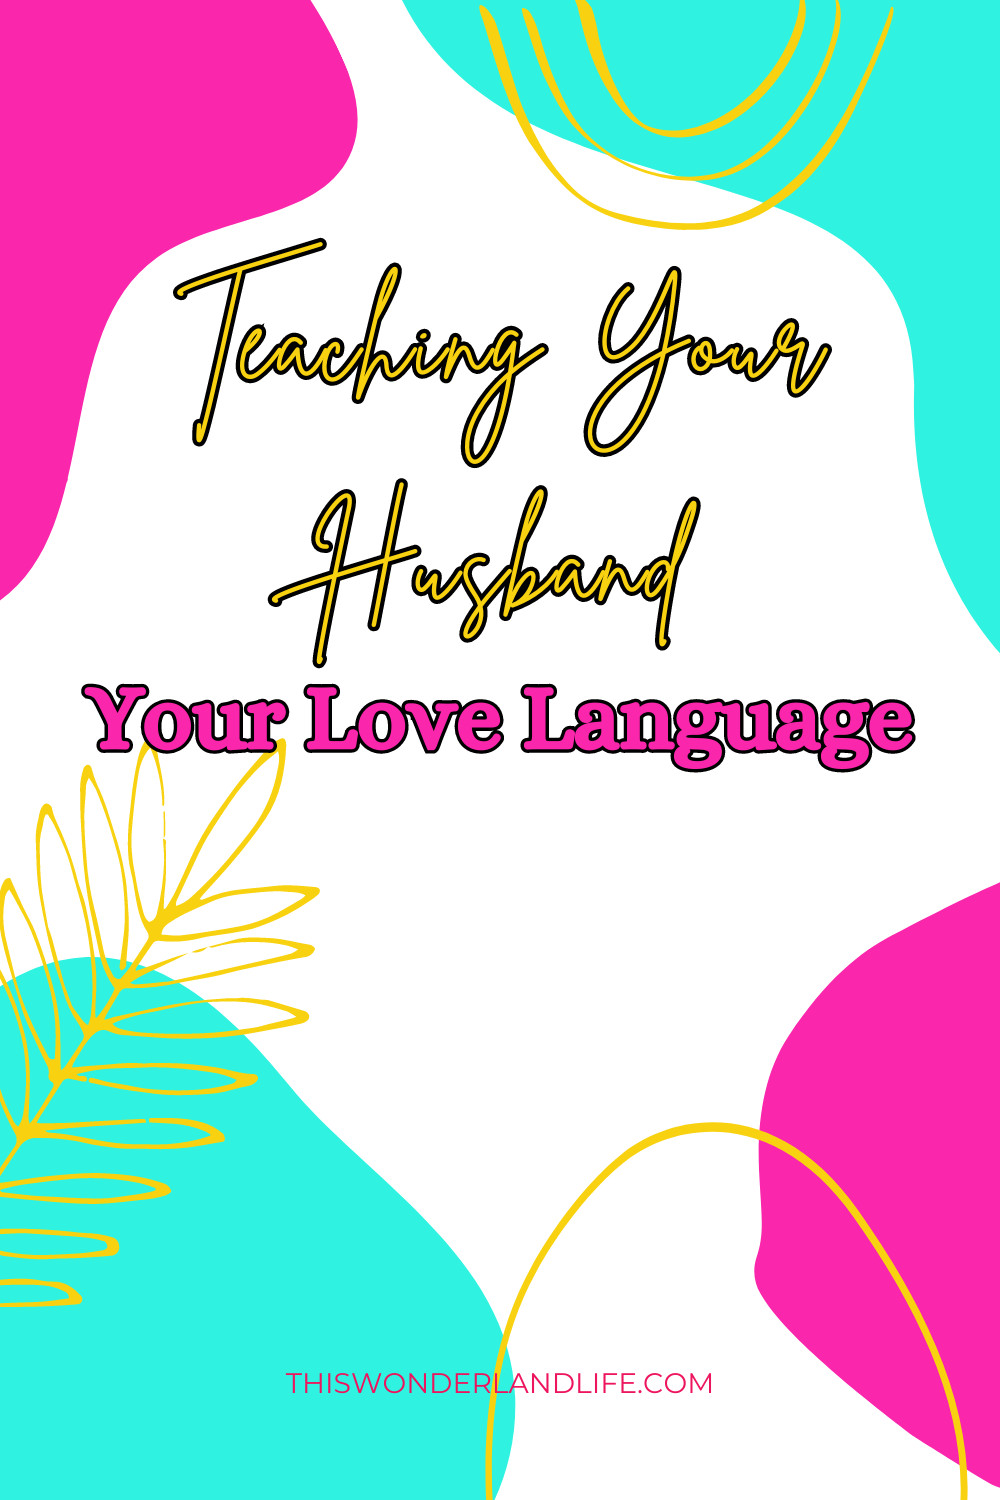 How to Teach Your Man Your Love Language When You're a Traditional Homemaker